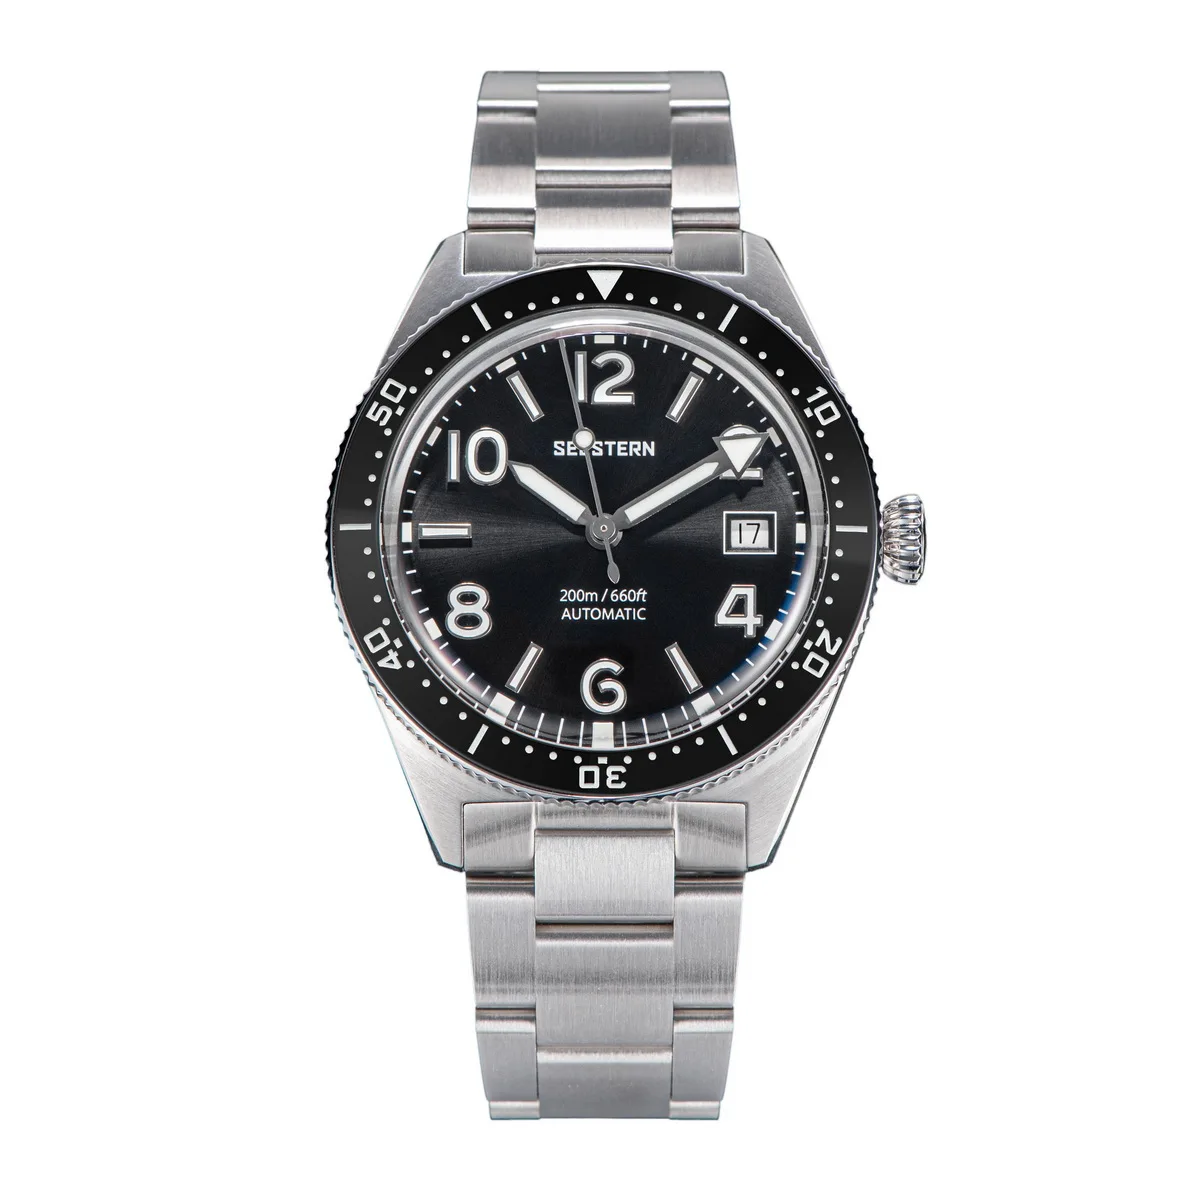 Diving Watch of Men Automatic Mechanical Wristwatches Seagul ST2130 Move... - £455.14 GBP